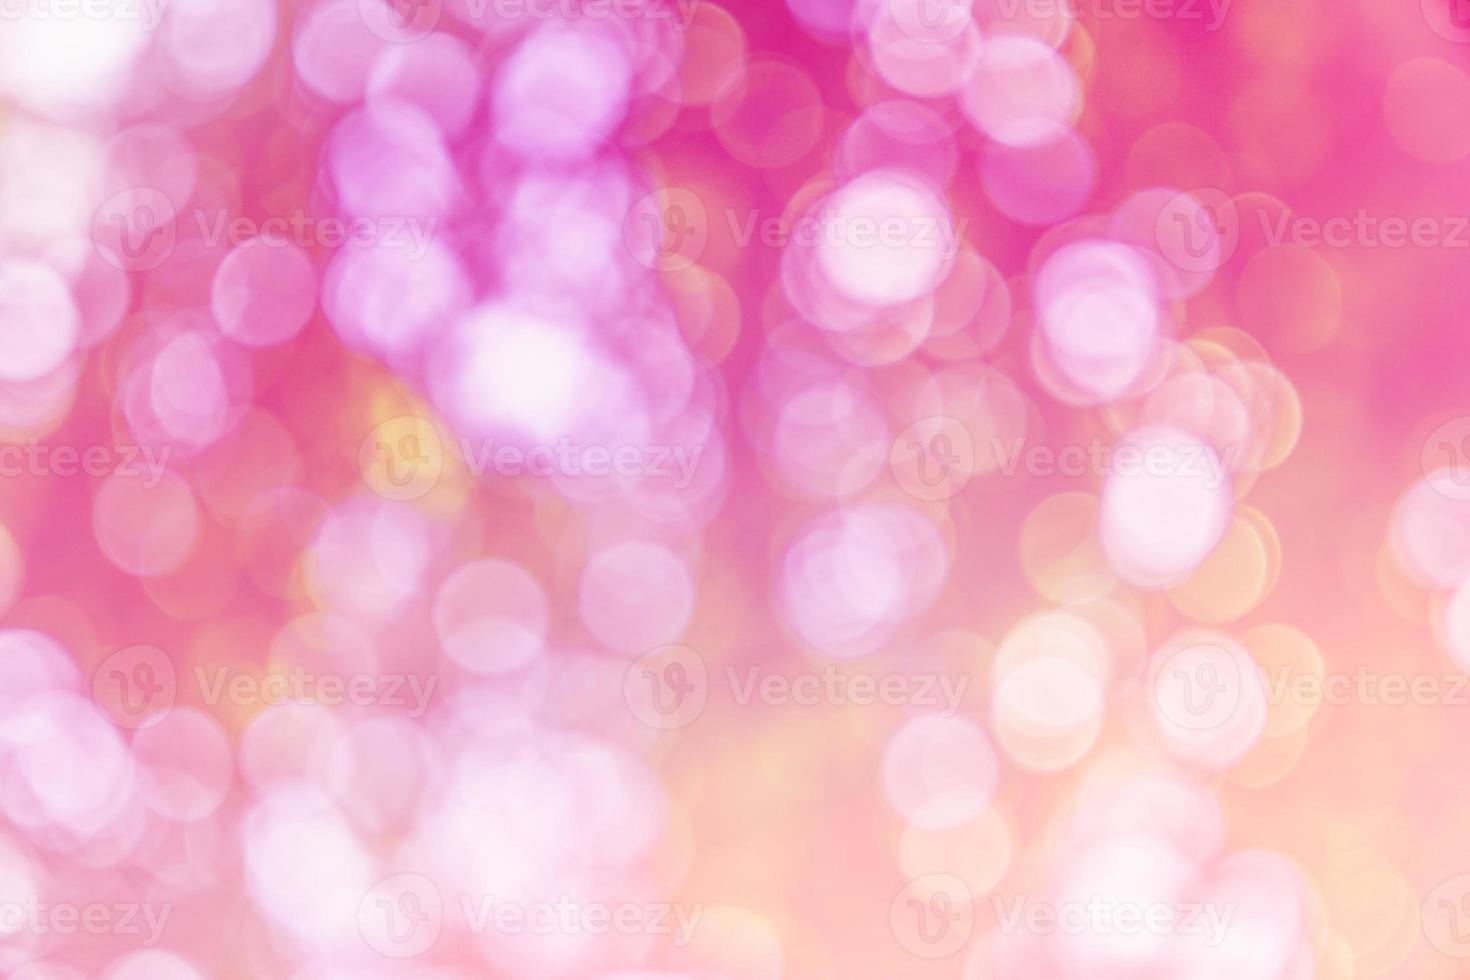 Defocus blurred background with bokeh taken from watercolor. Defocused image for design template photo